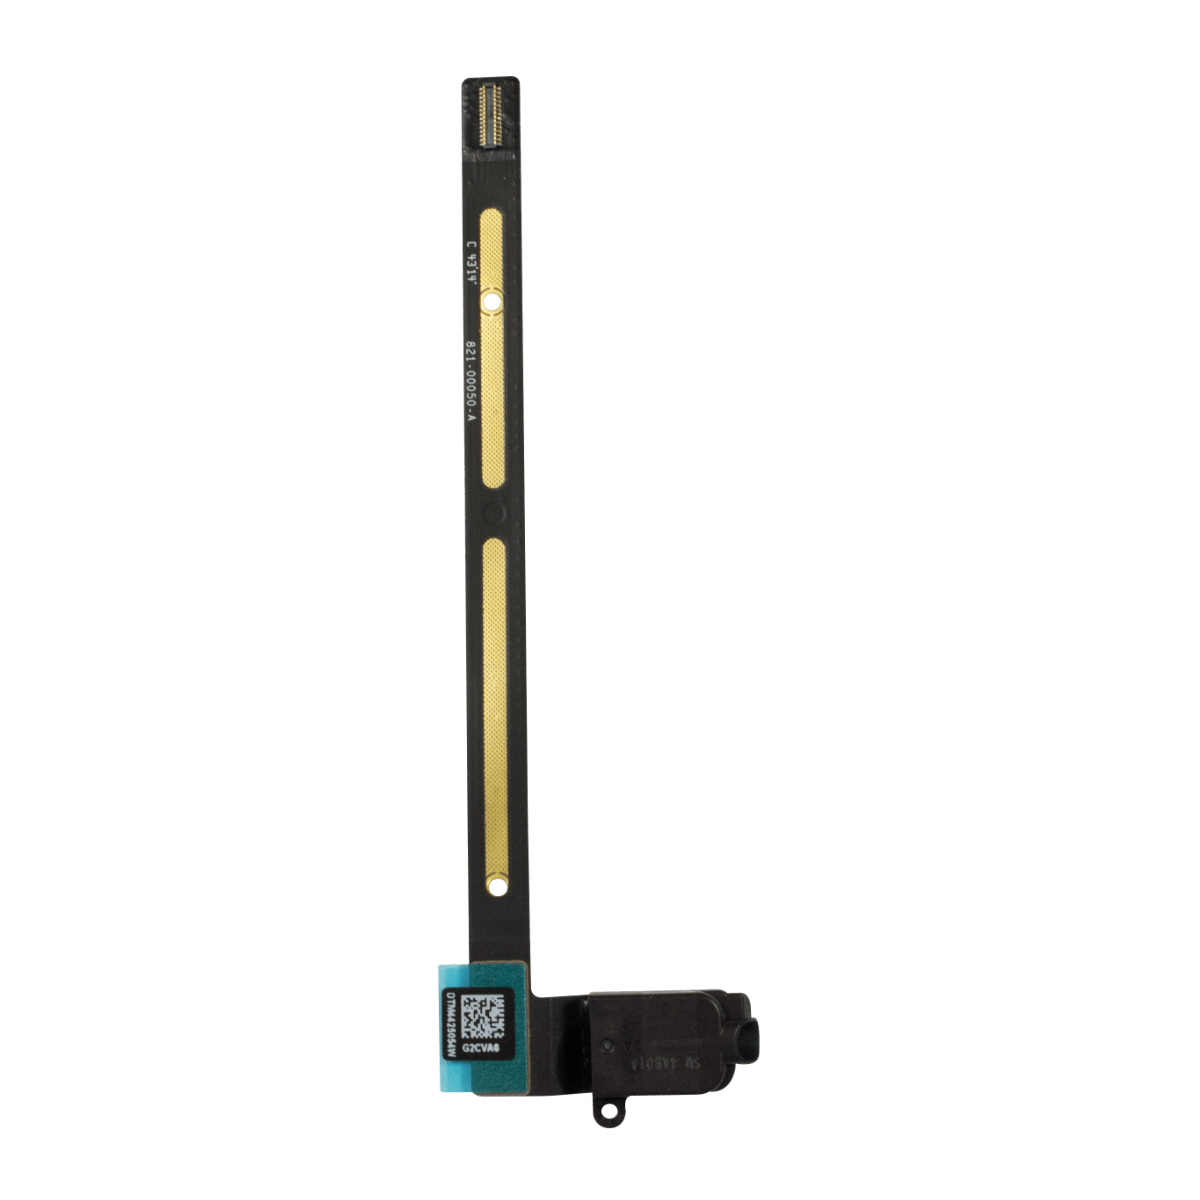 iPad Air 2 Headphone Jack Flex Cable Replacement